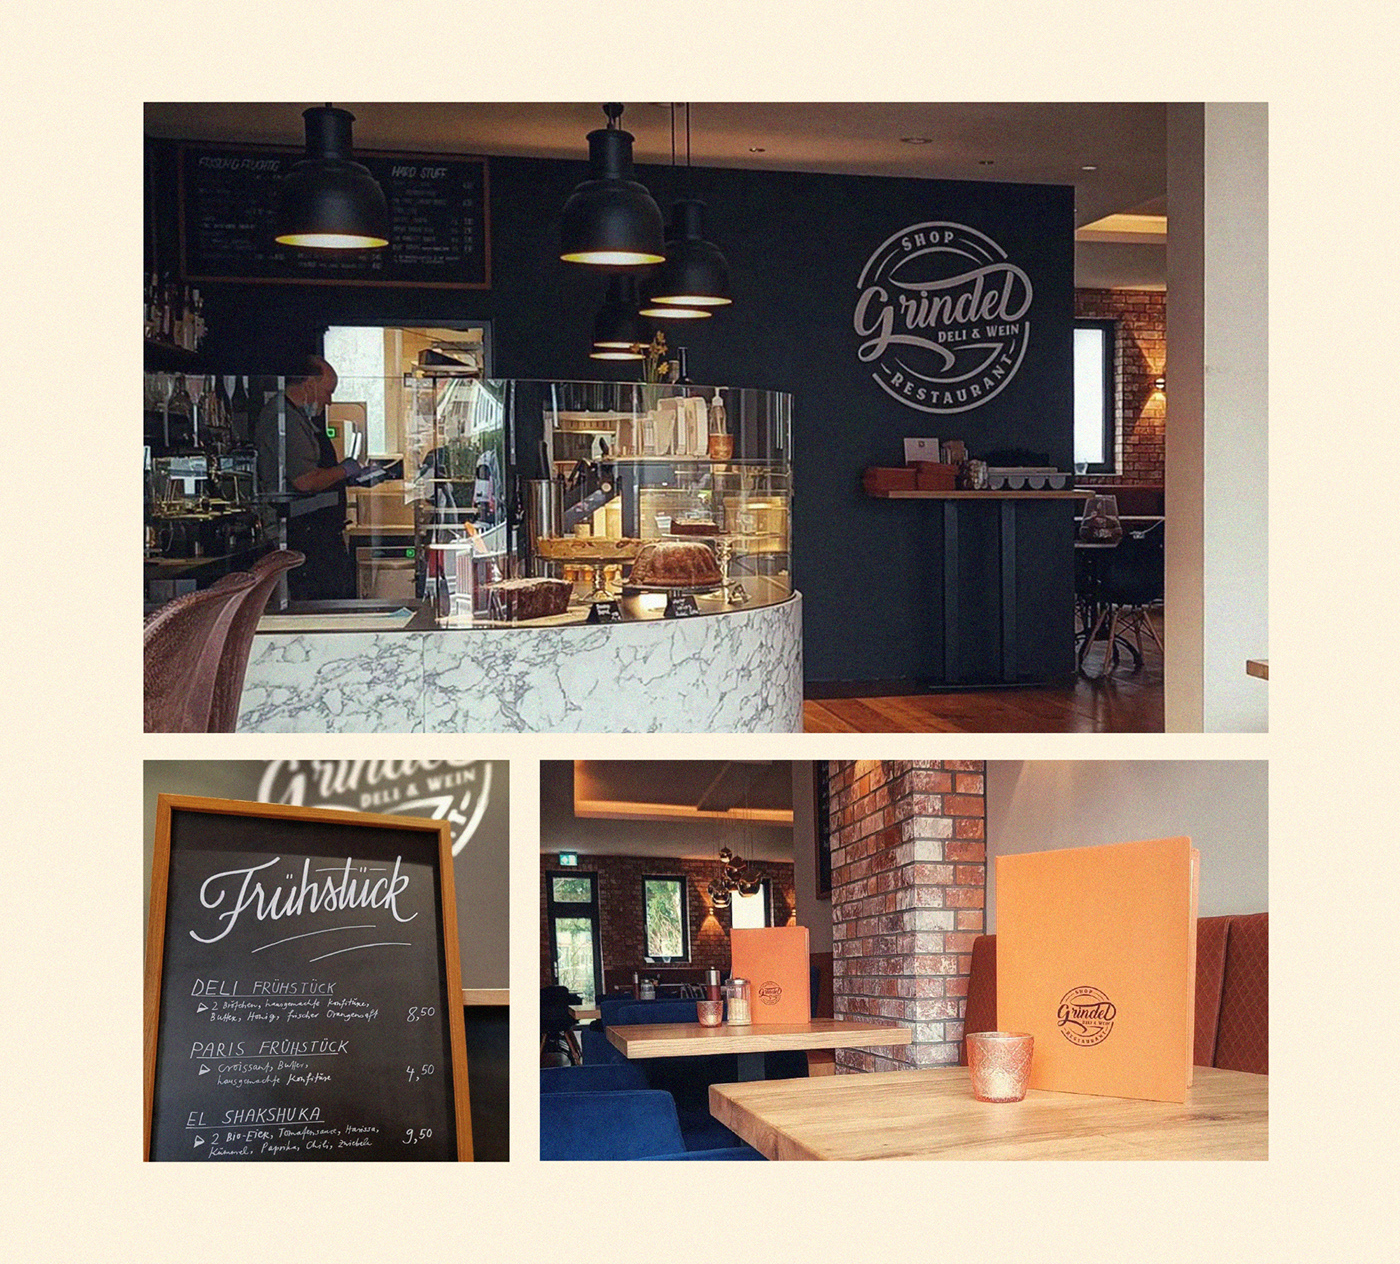 Pictures of the restaurant in Germany with a nice design. The logo is in the wall. Logo on the wall 